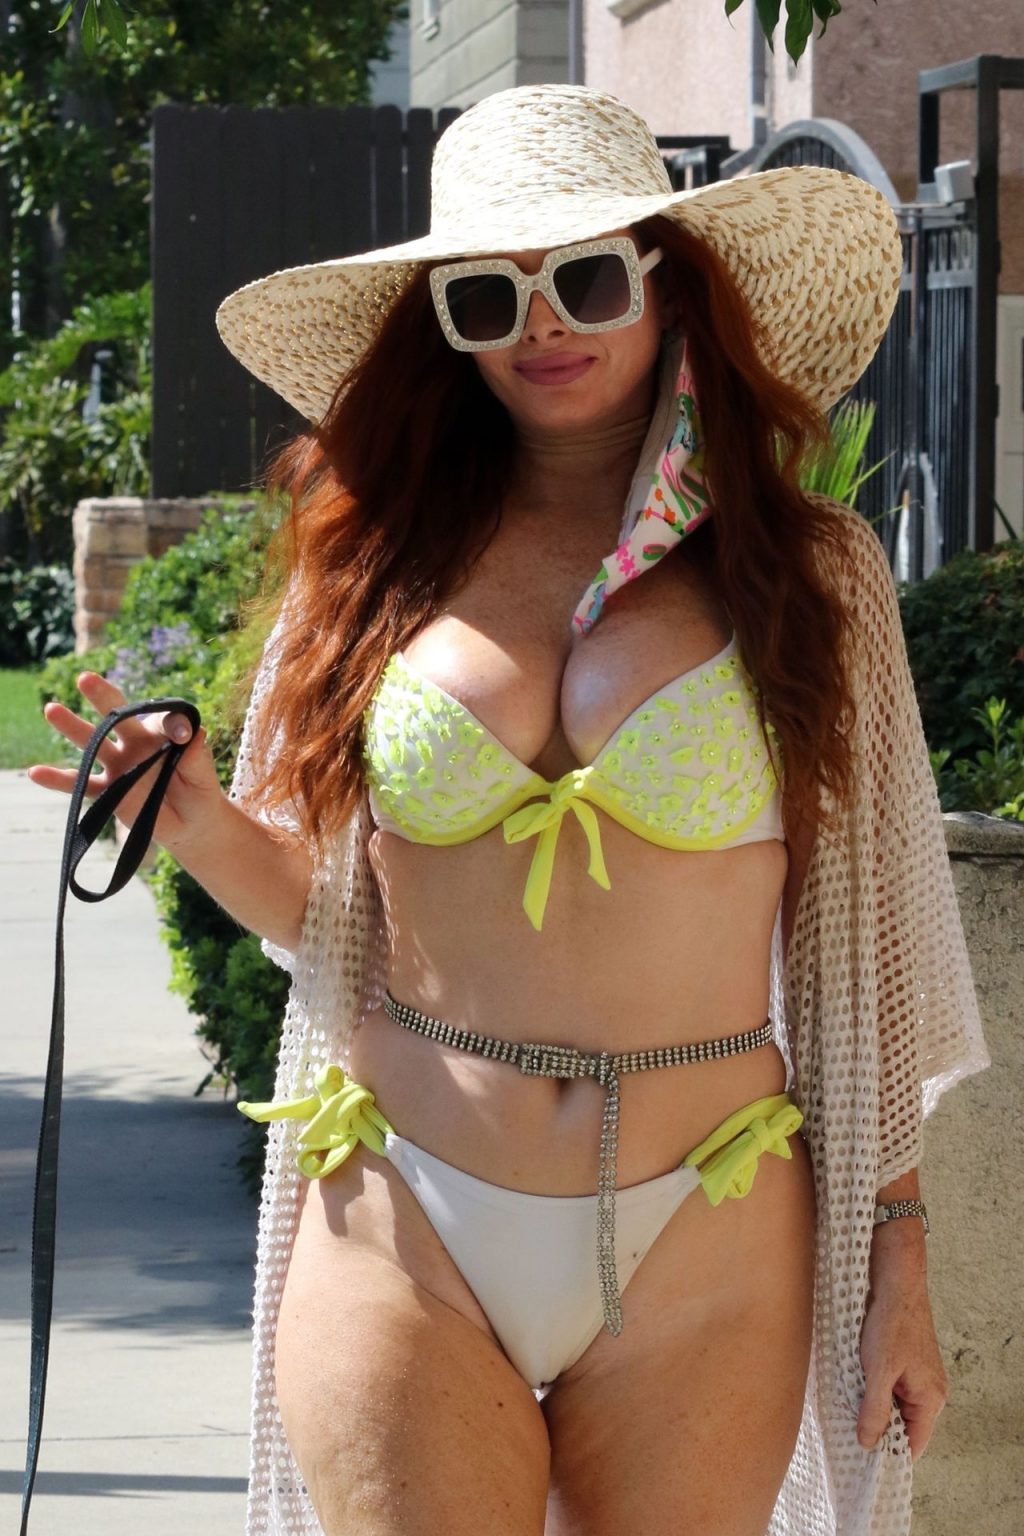 Phoebe Price Poses in a Yellow Bikini with Her Dog (36 Photos)